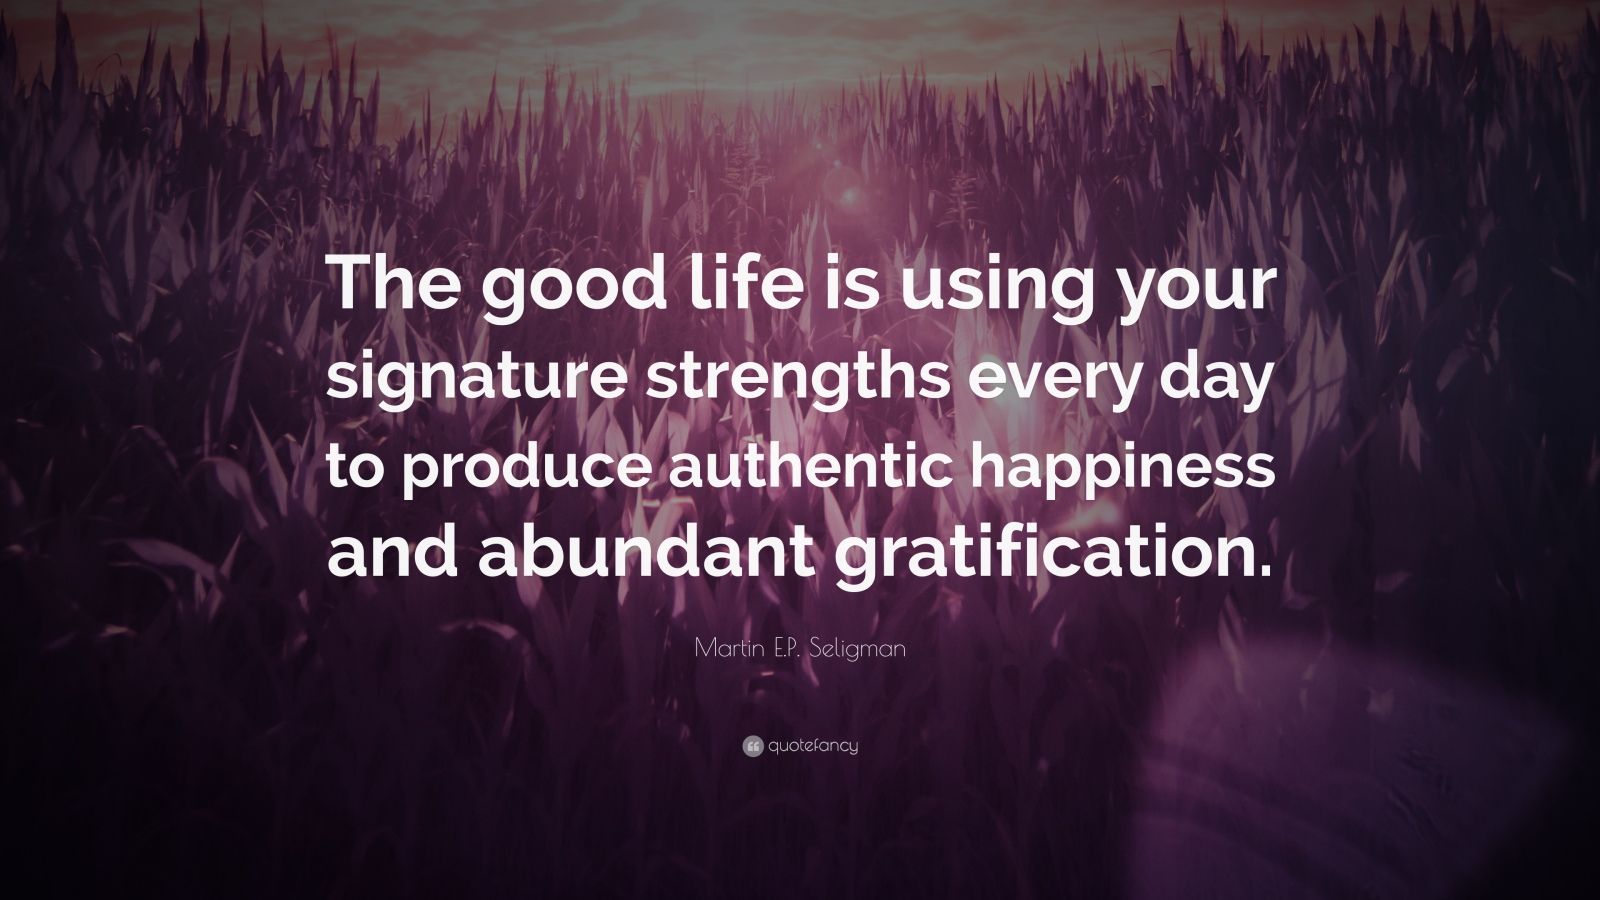 1185165 Martin E P Seligman Quote The good life is using your signature